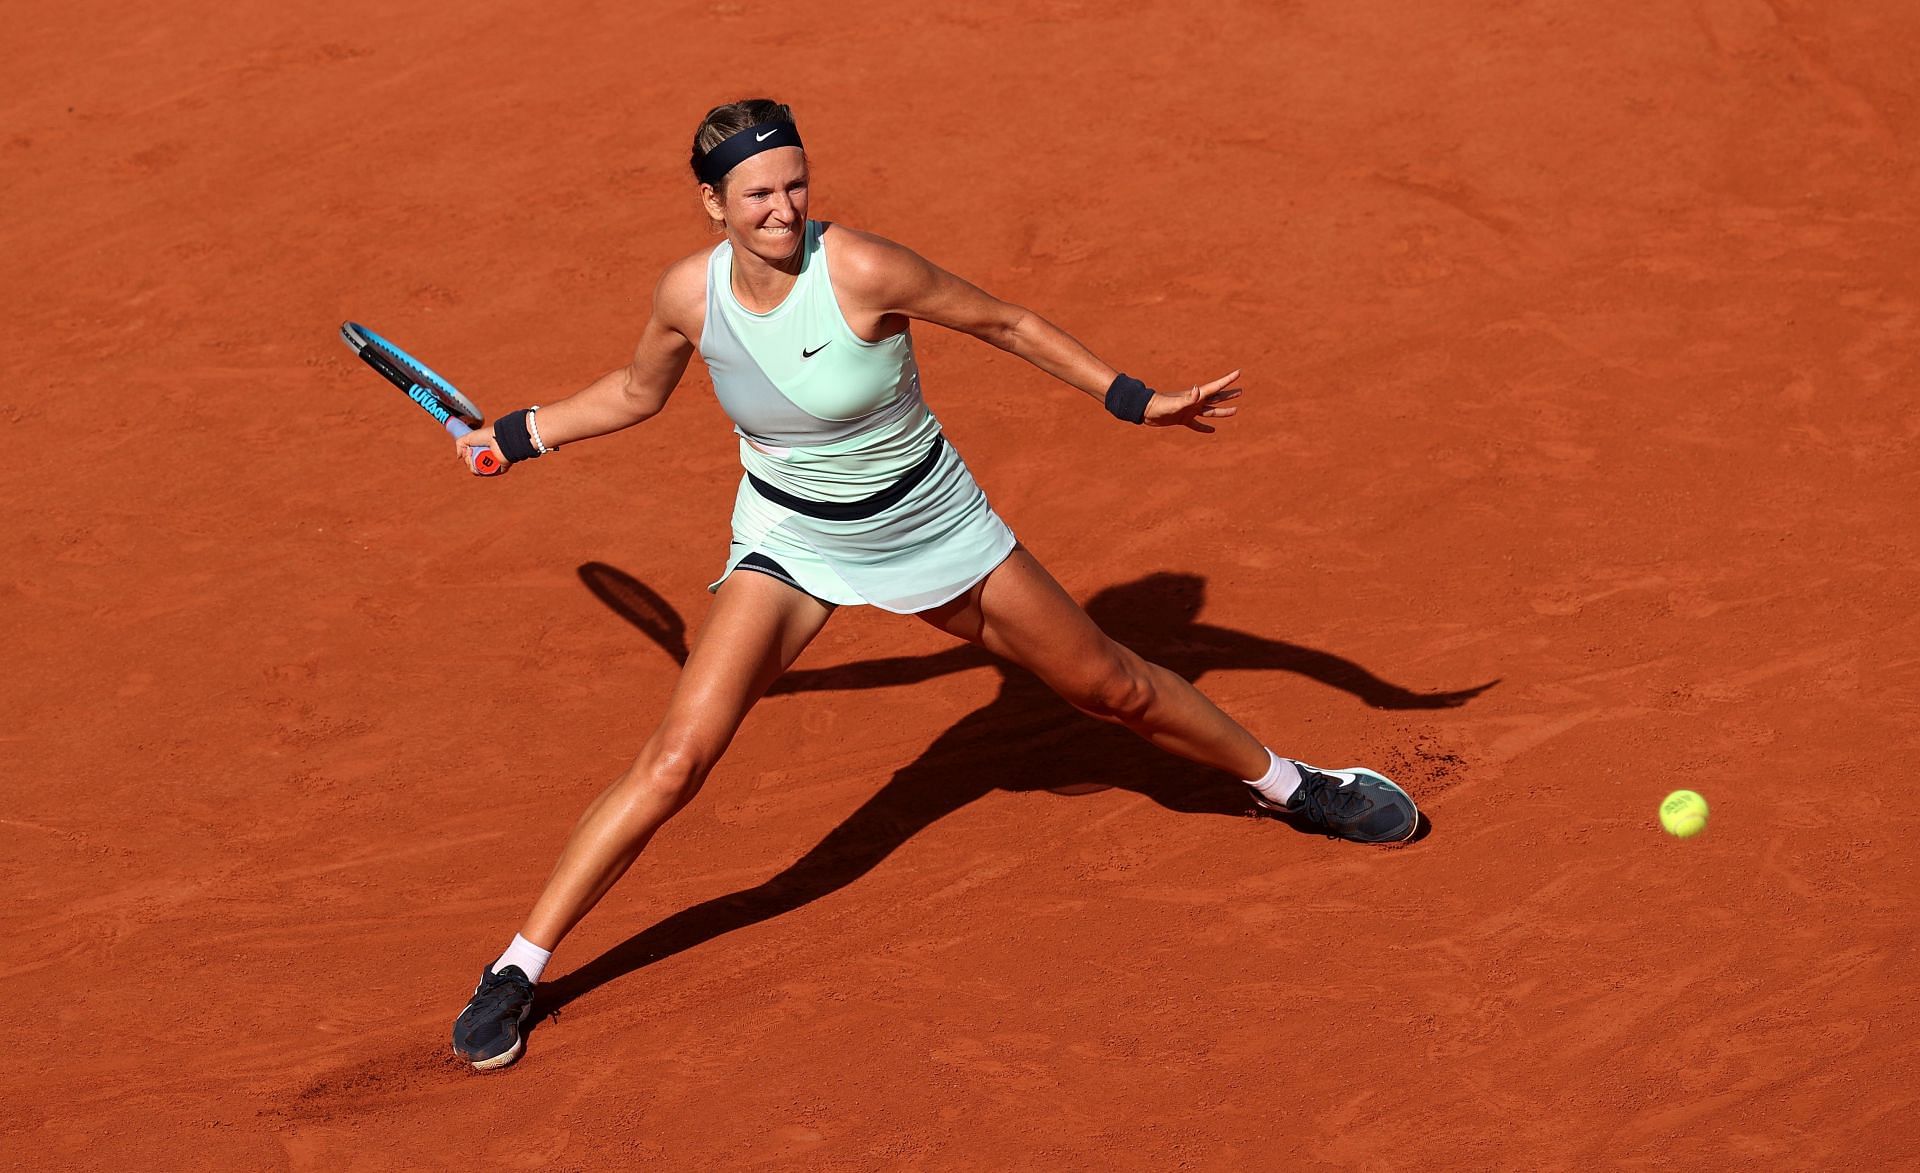 Victoria Azarenka was one of the biggest upsets on Day 6 of the 2022 French Open.